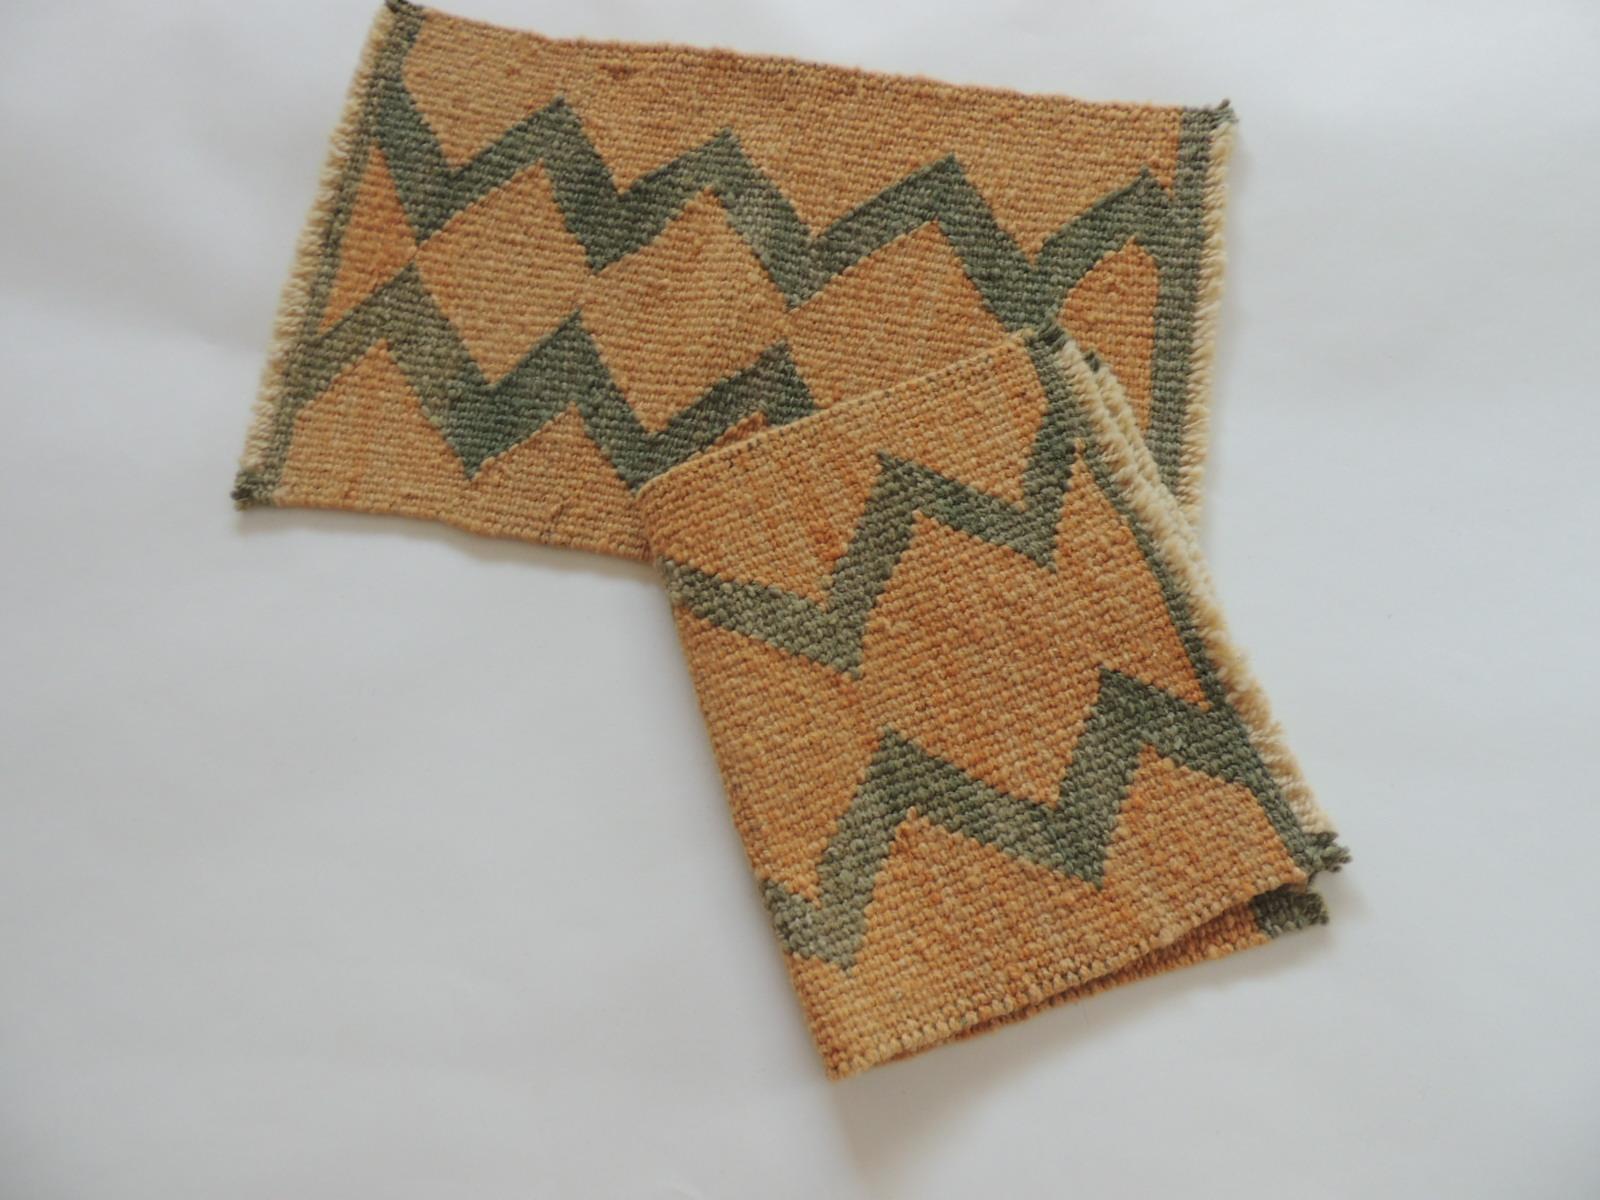 Tribal Pair of Vintage Pale Orange and Green Woven Rug Samples